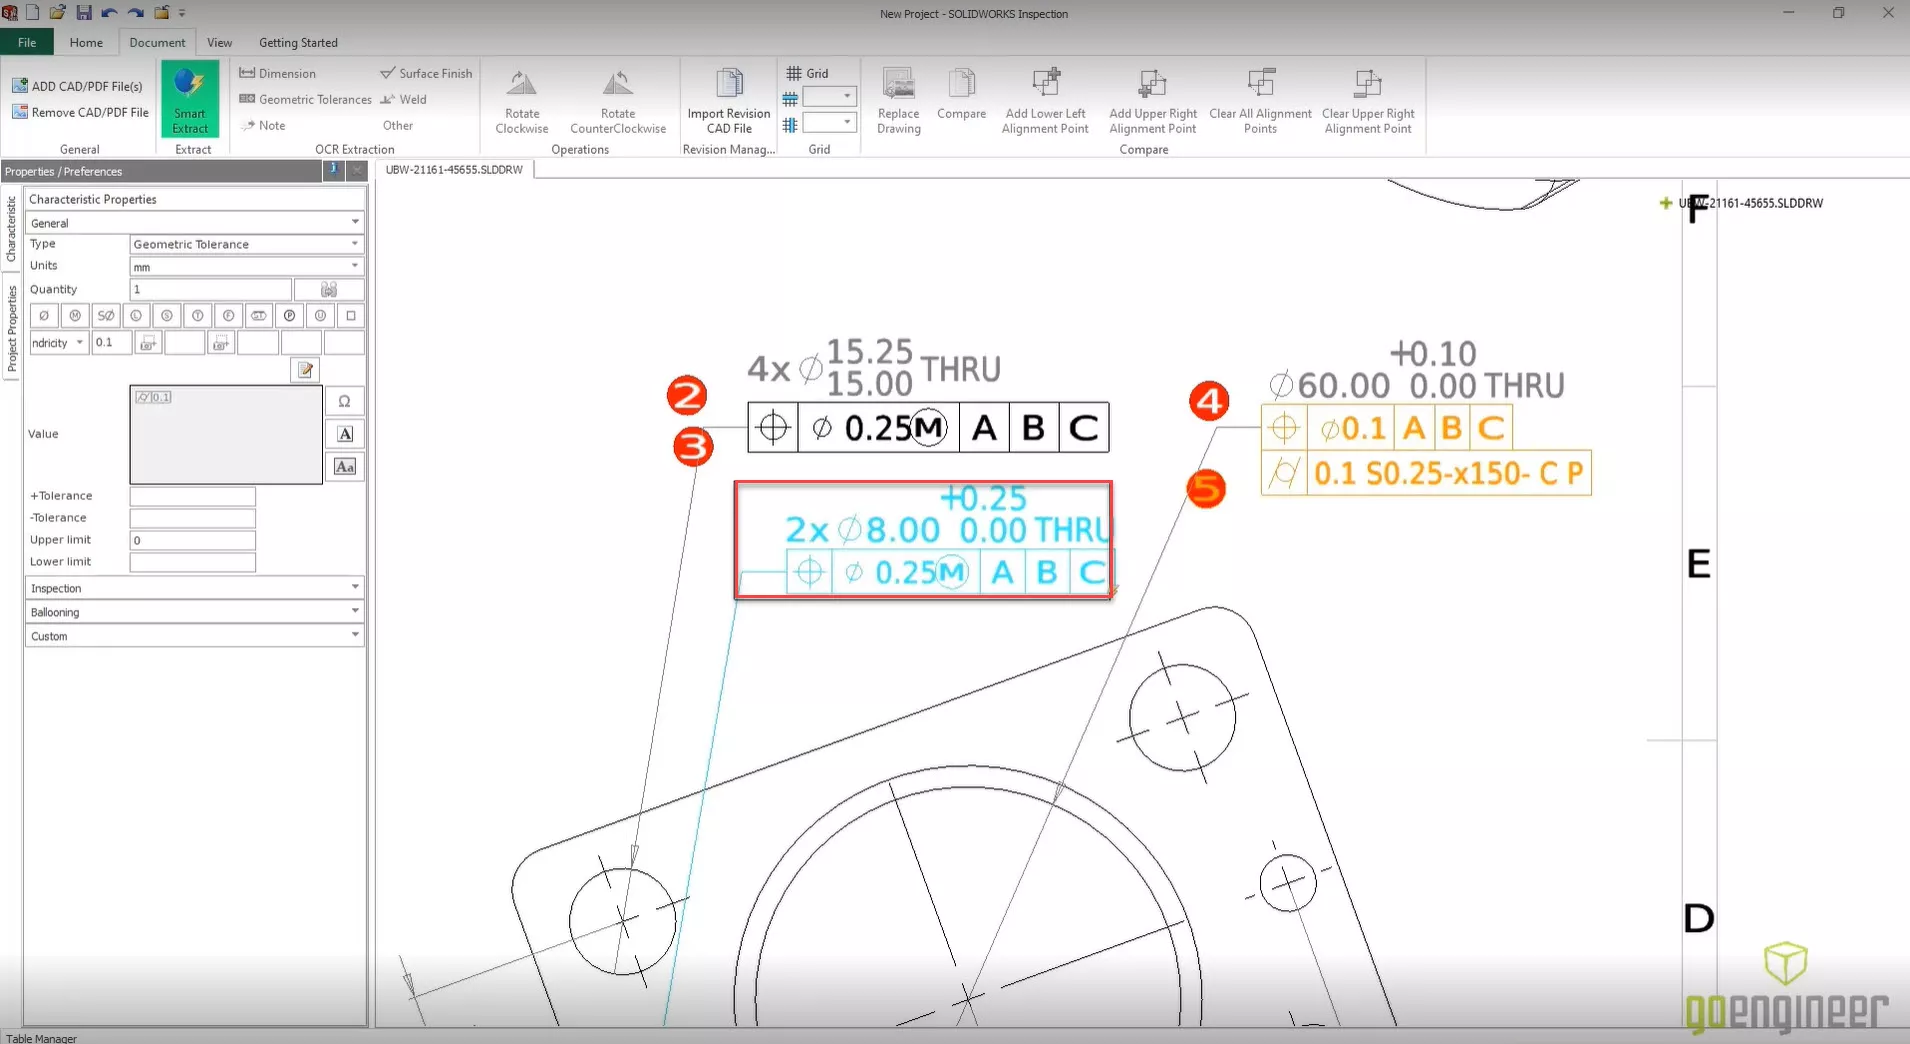 What's New in SOLIDWORKS Inspection 2022